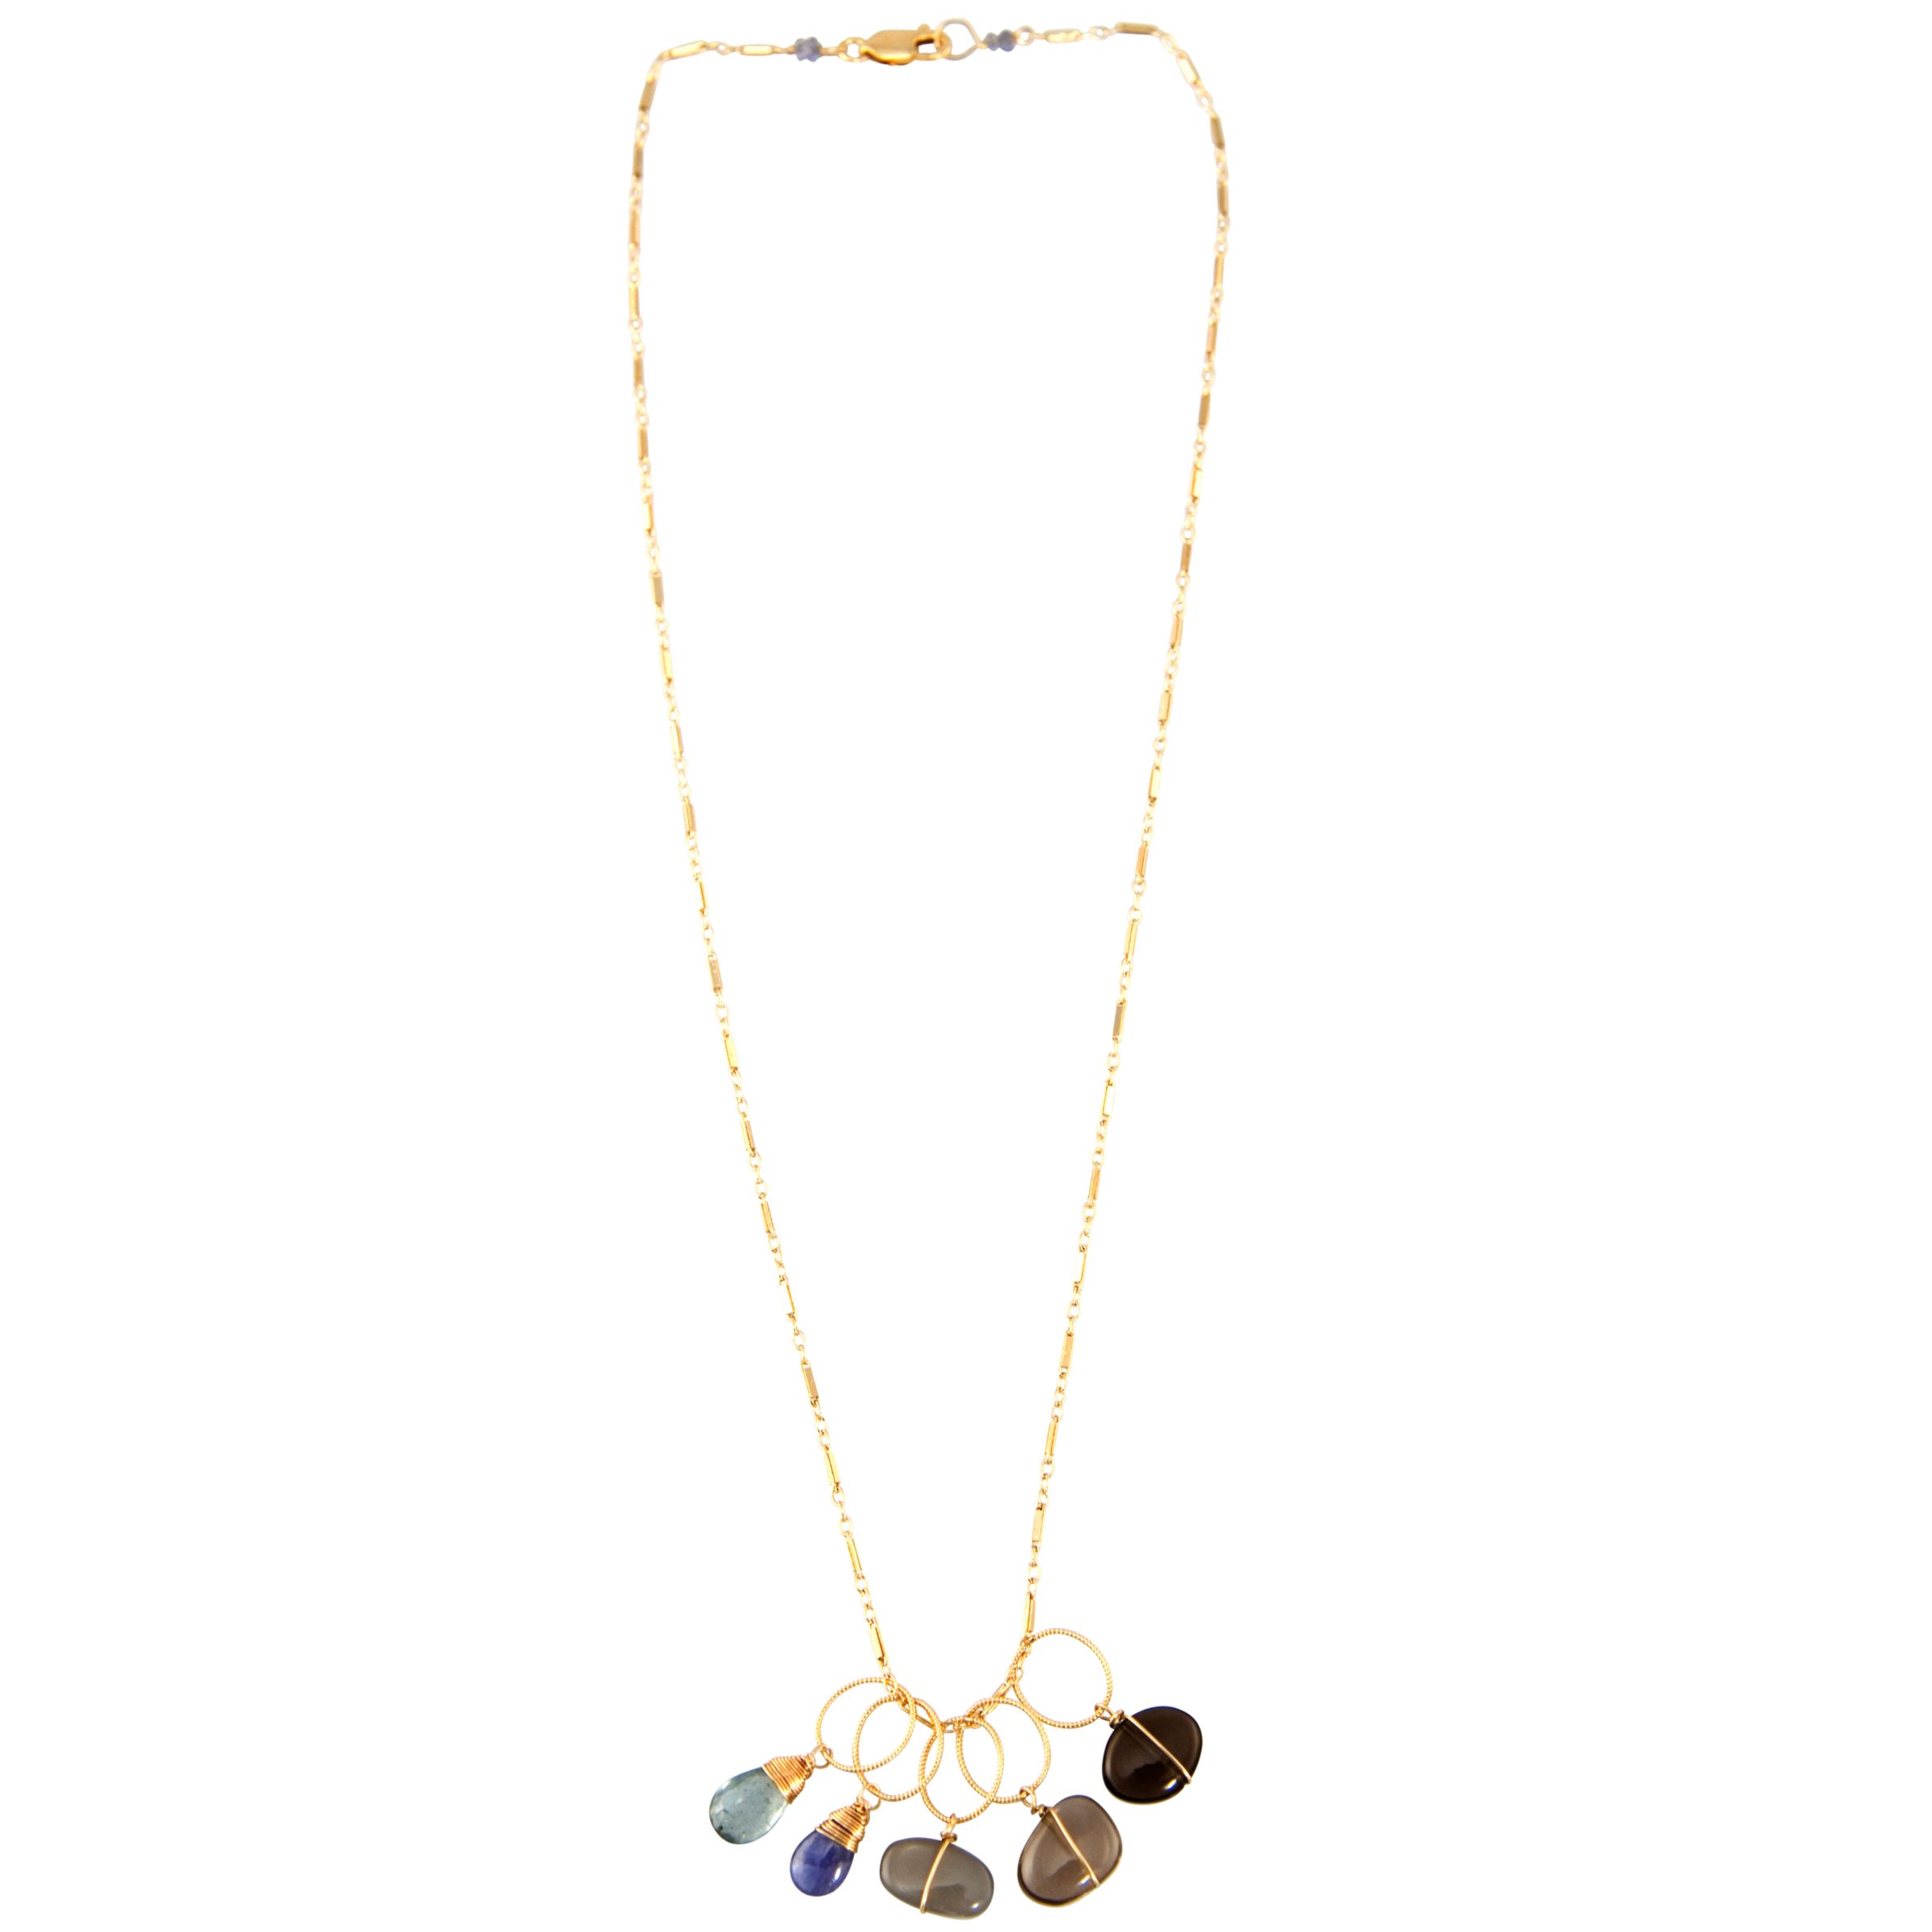 RueBelle 14ct Gold Filled 5 Colour Stones Necklace at John Lewis